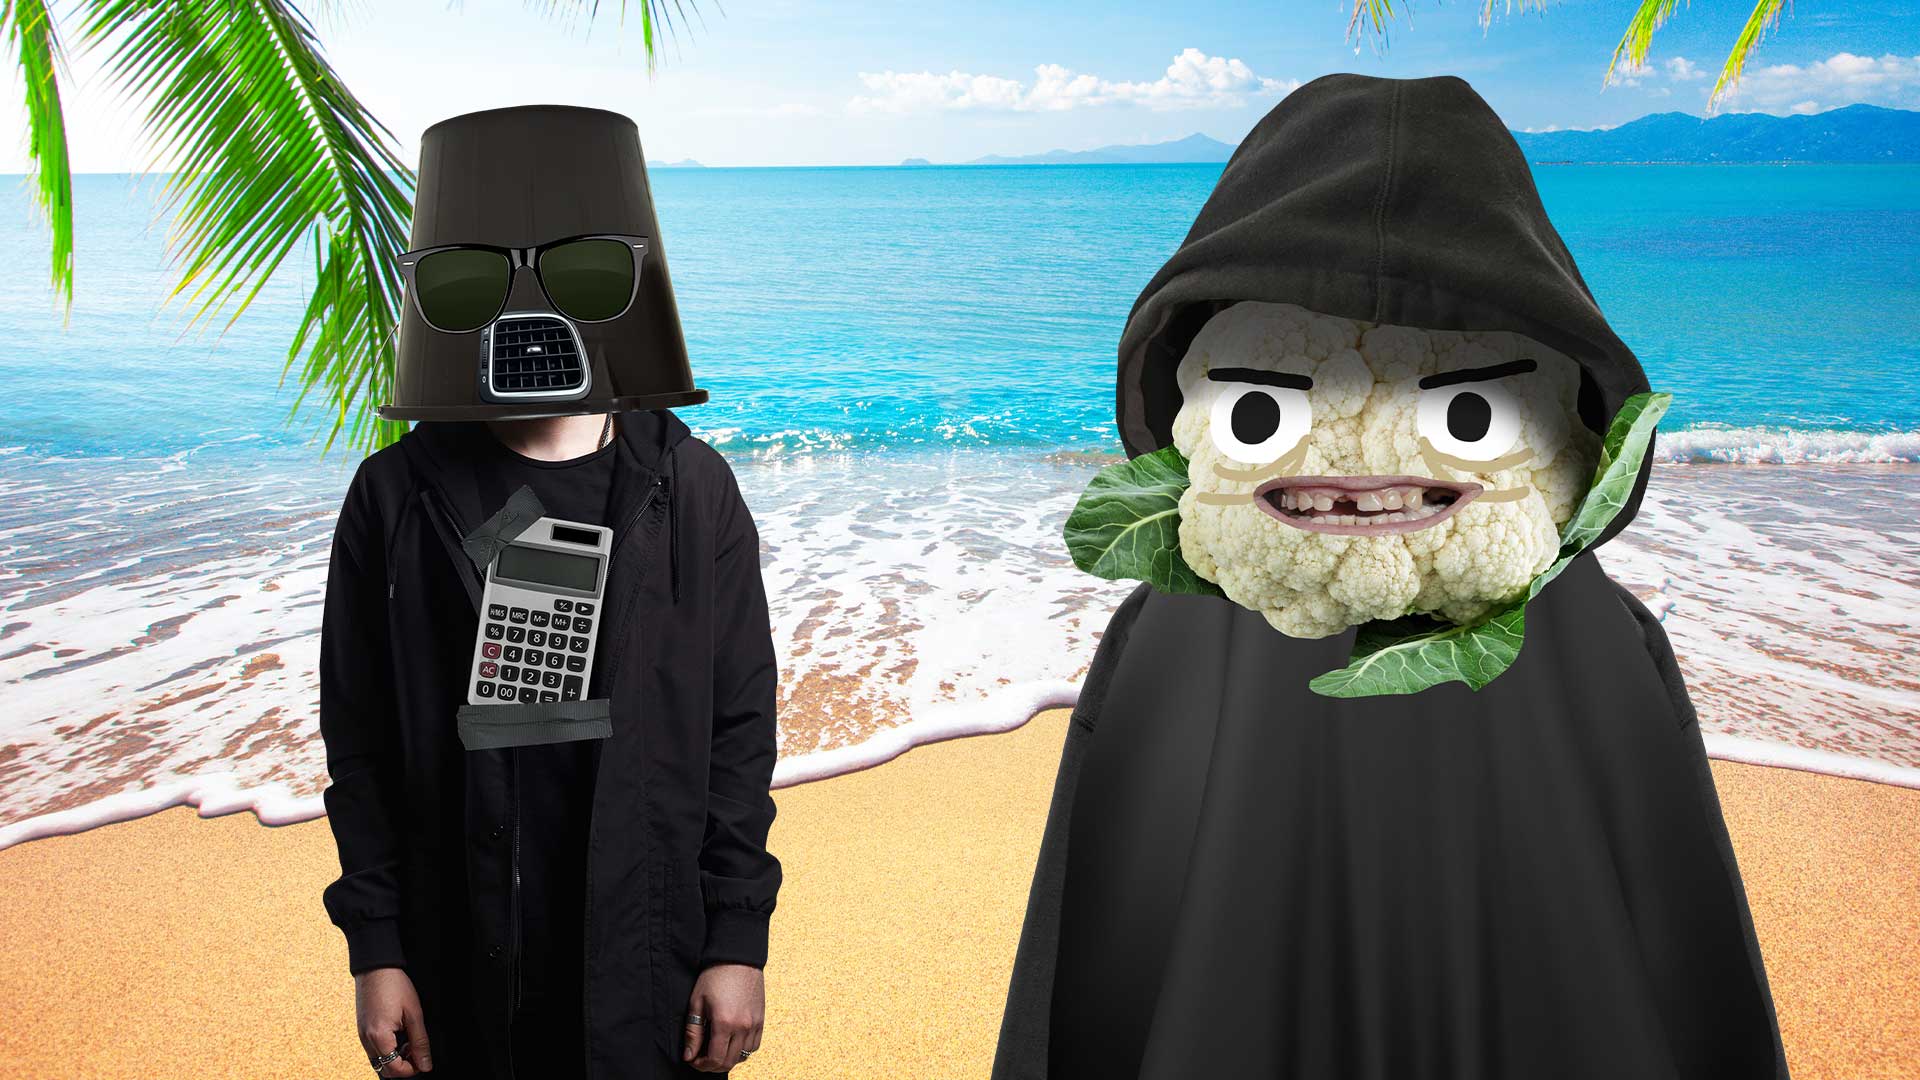 Star Wars characters on the beach